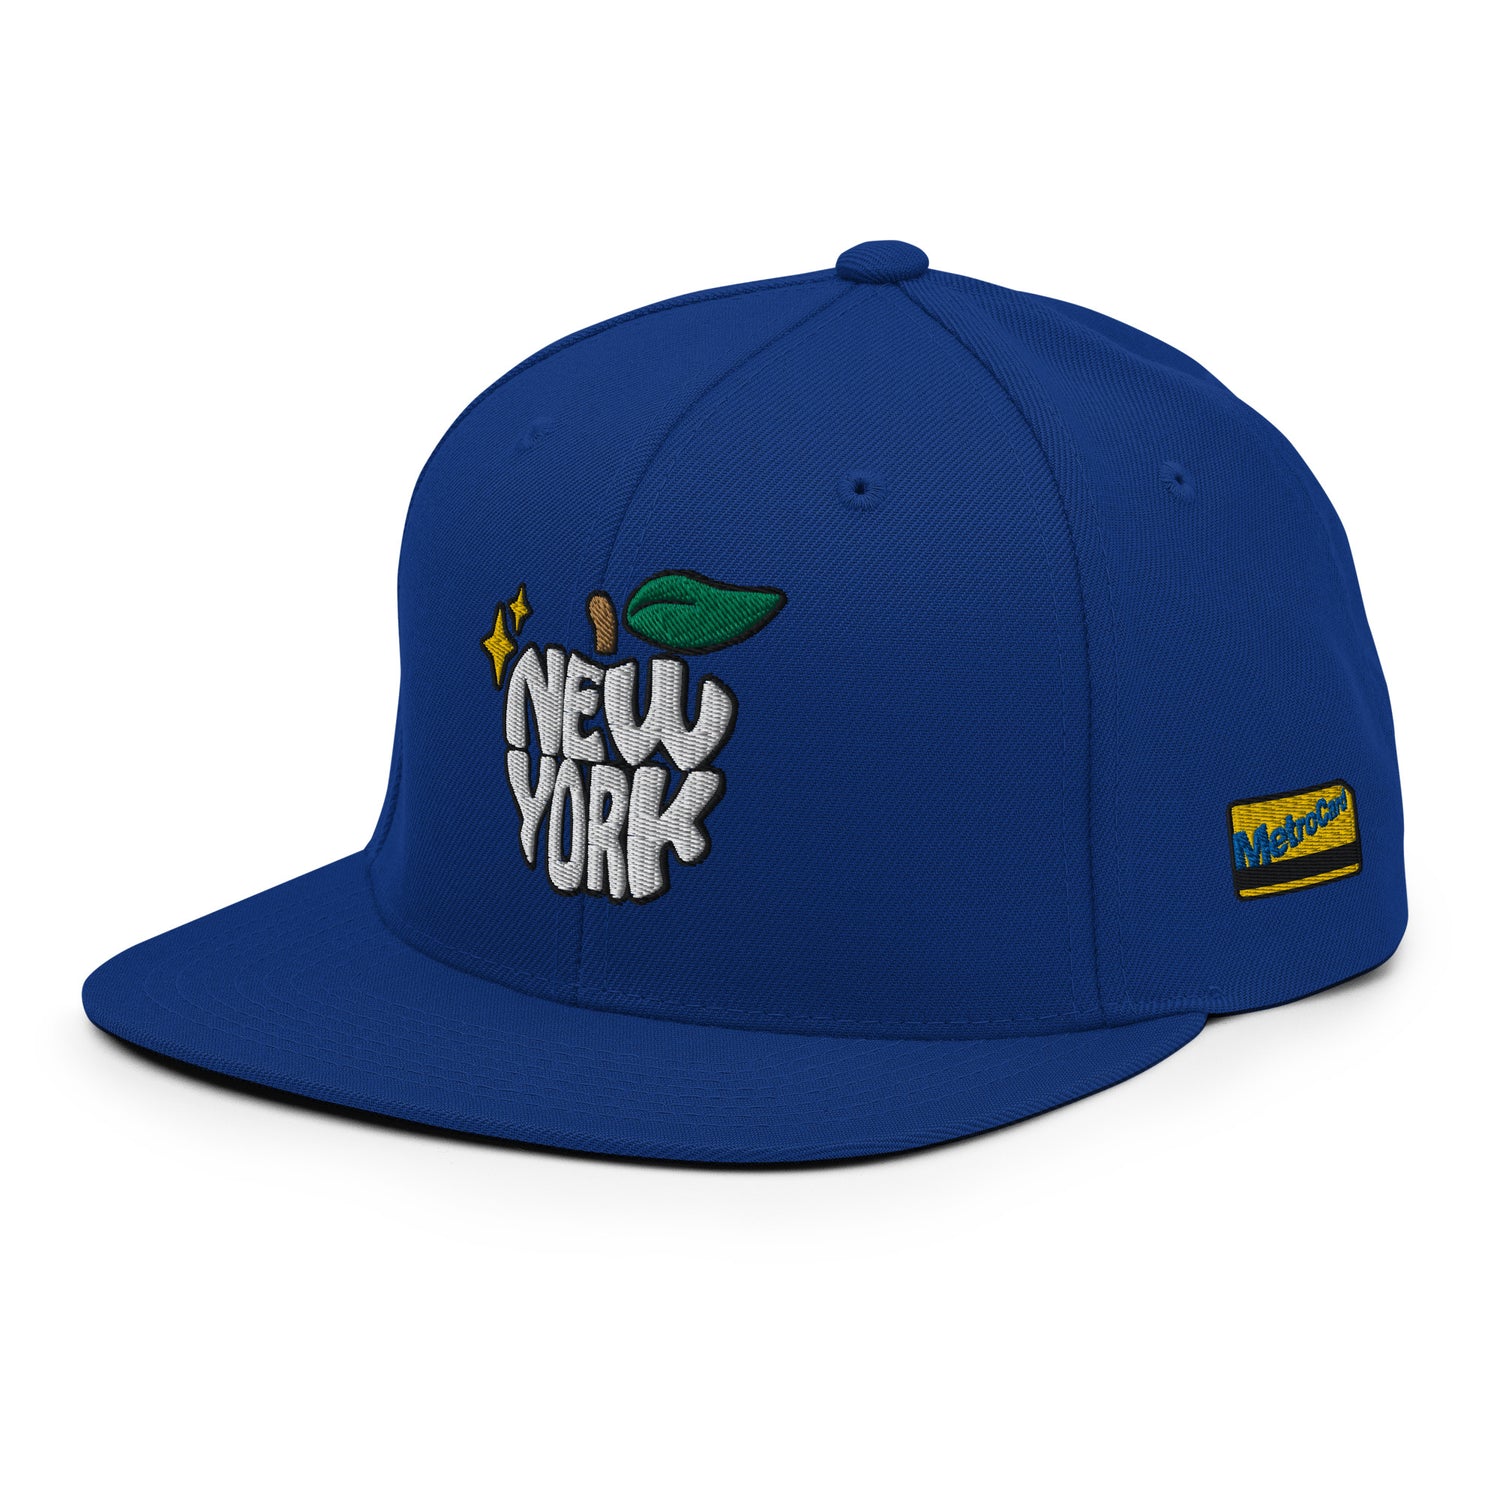 New York Apple Logo Embroidered Royal Blue Snapback Hat (Metro Card) Scattered Streetwear